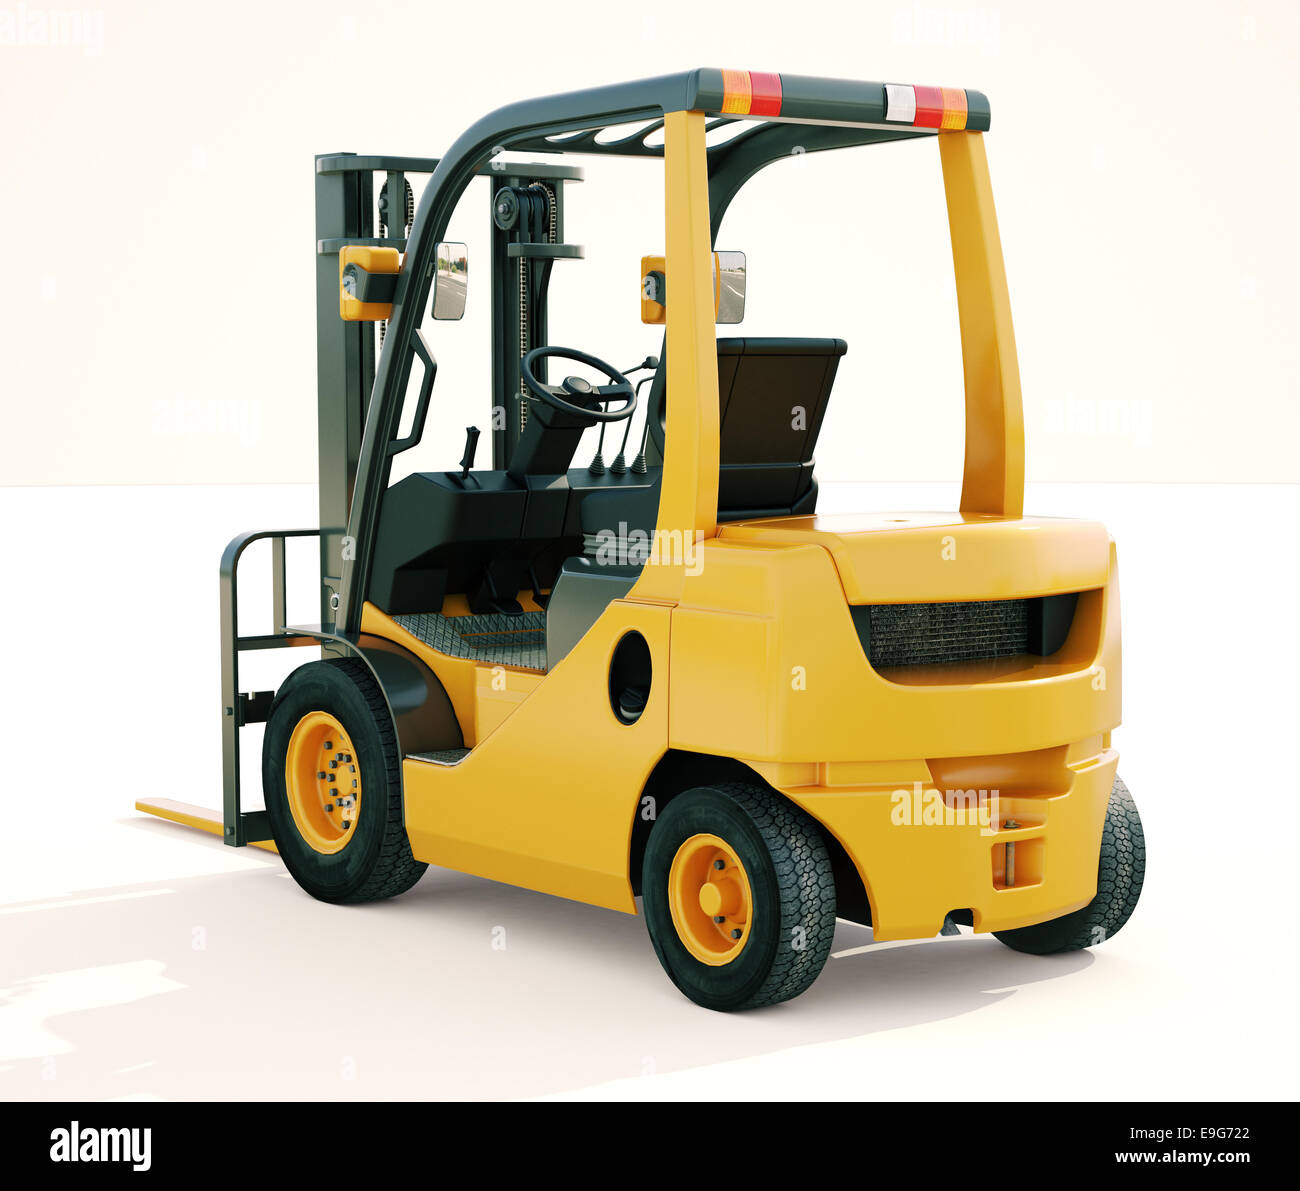 Yale Forklift High Resolution Stock Photography And Images Alamy